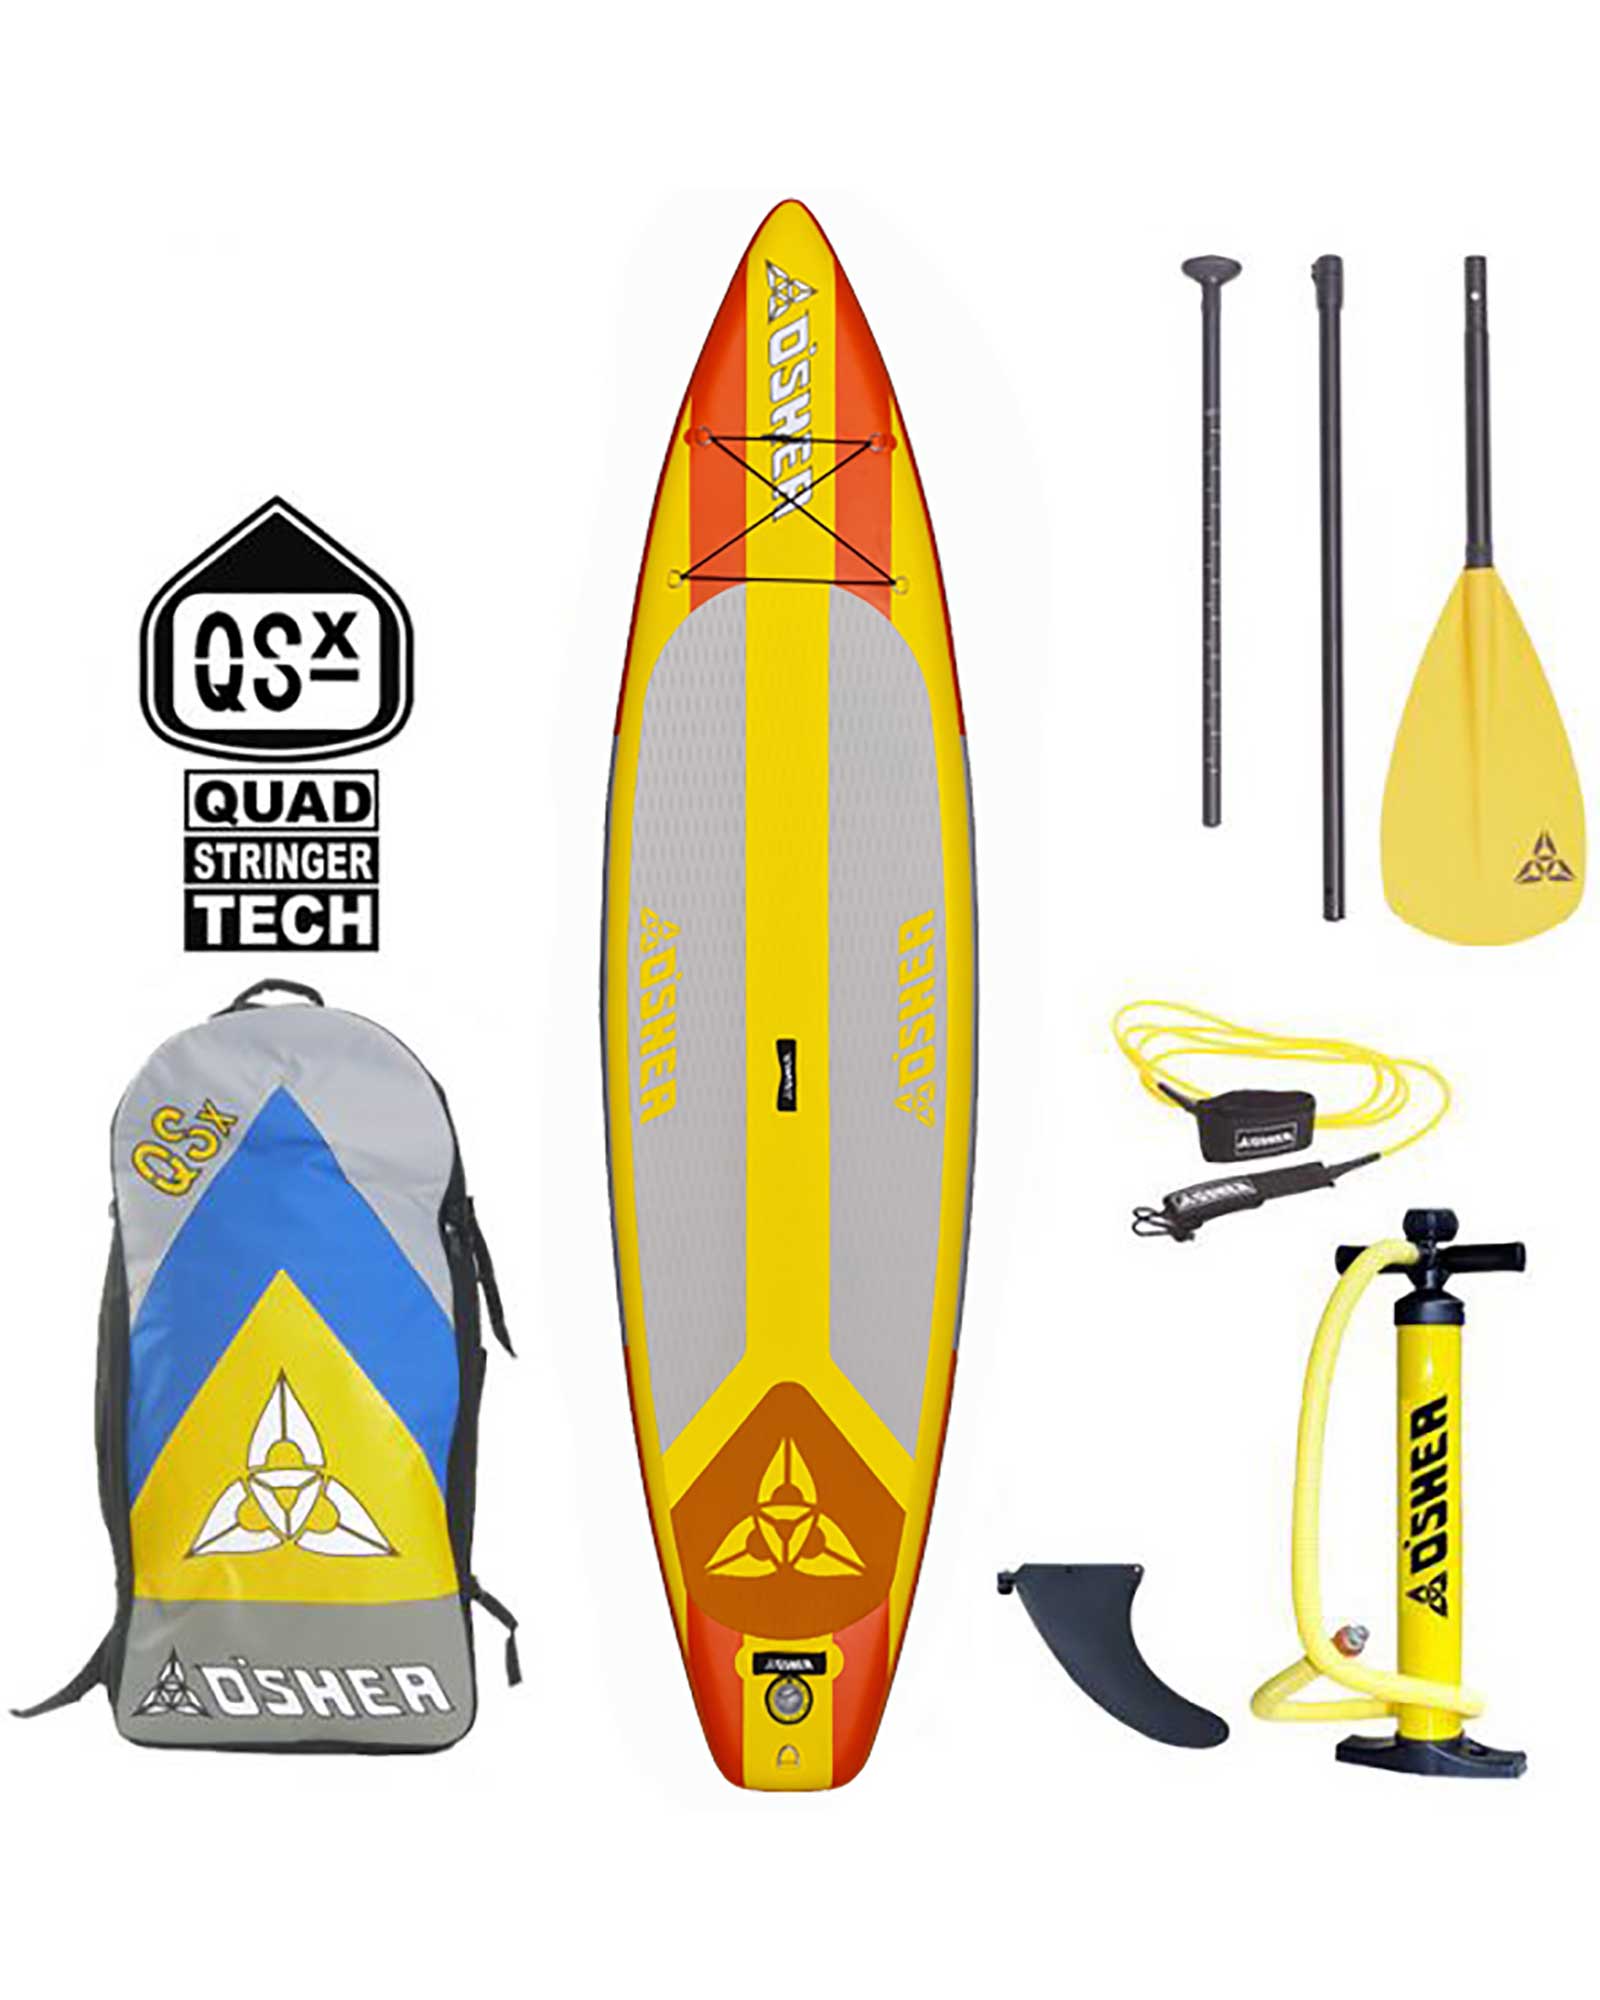 O'Shea QSx 11'2 Inflatable Stand-Up Paddleboard Package